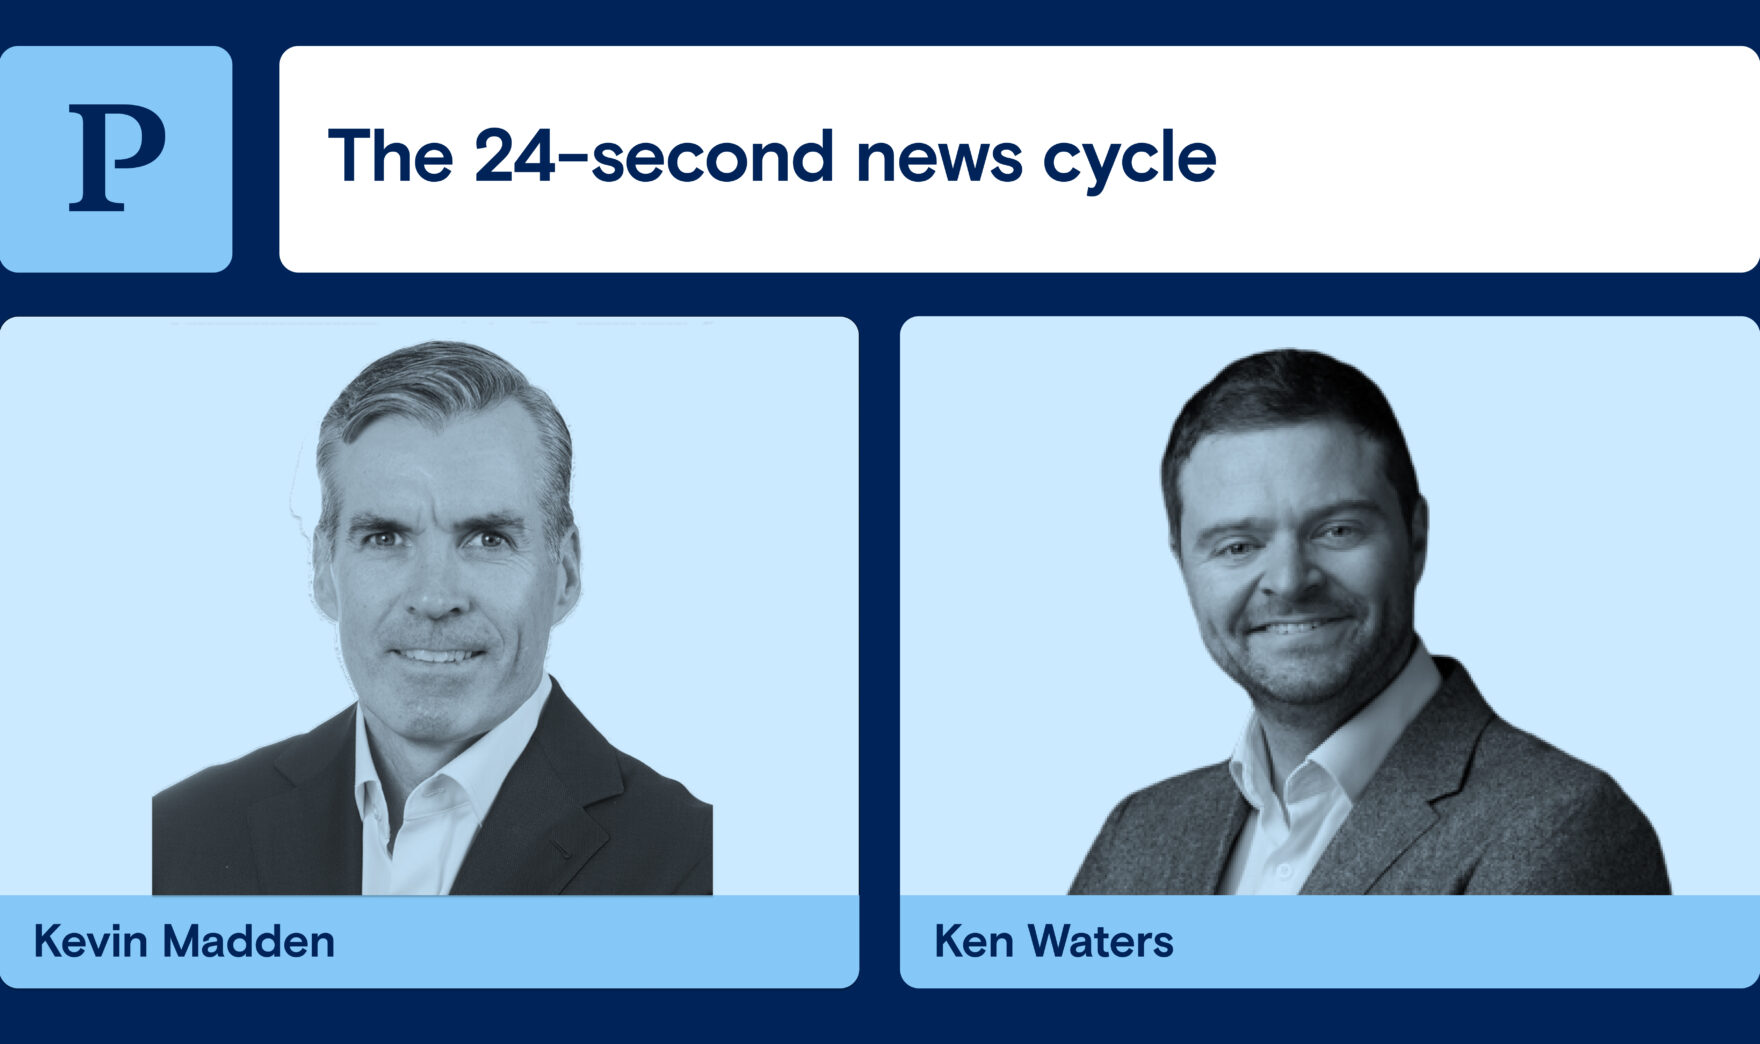 The 24-second news cycle